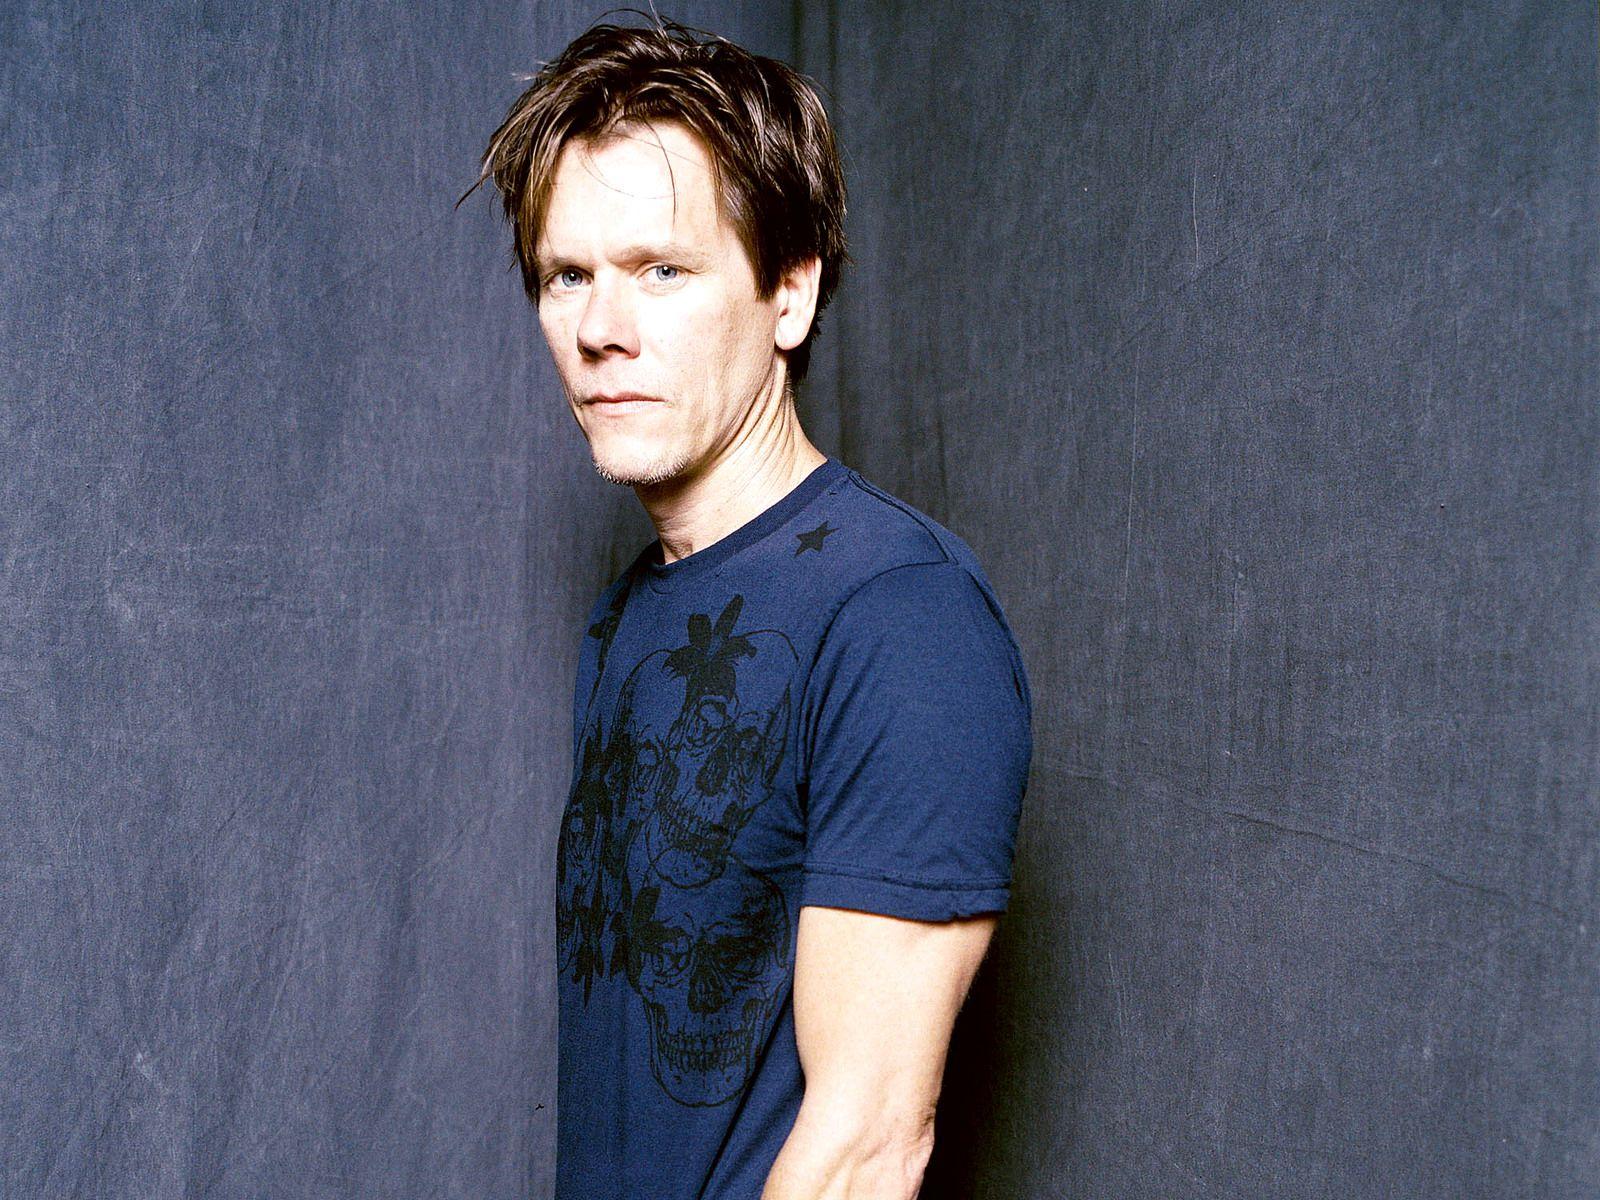 Kevin Bacon Computer Wallpaper 53746 1600x1200 px